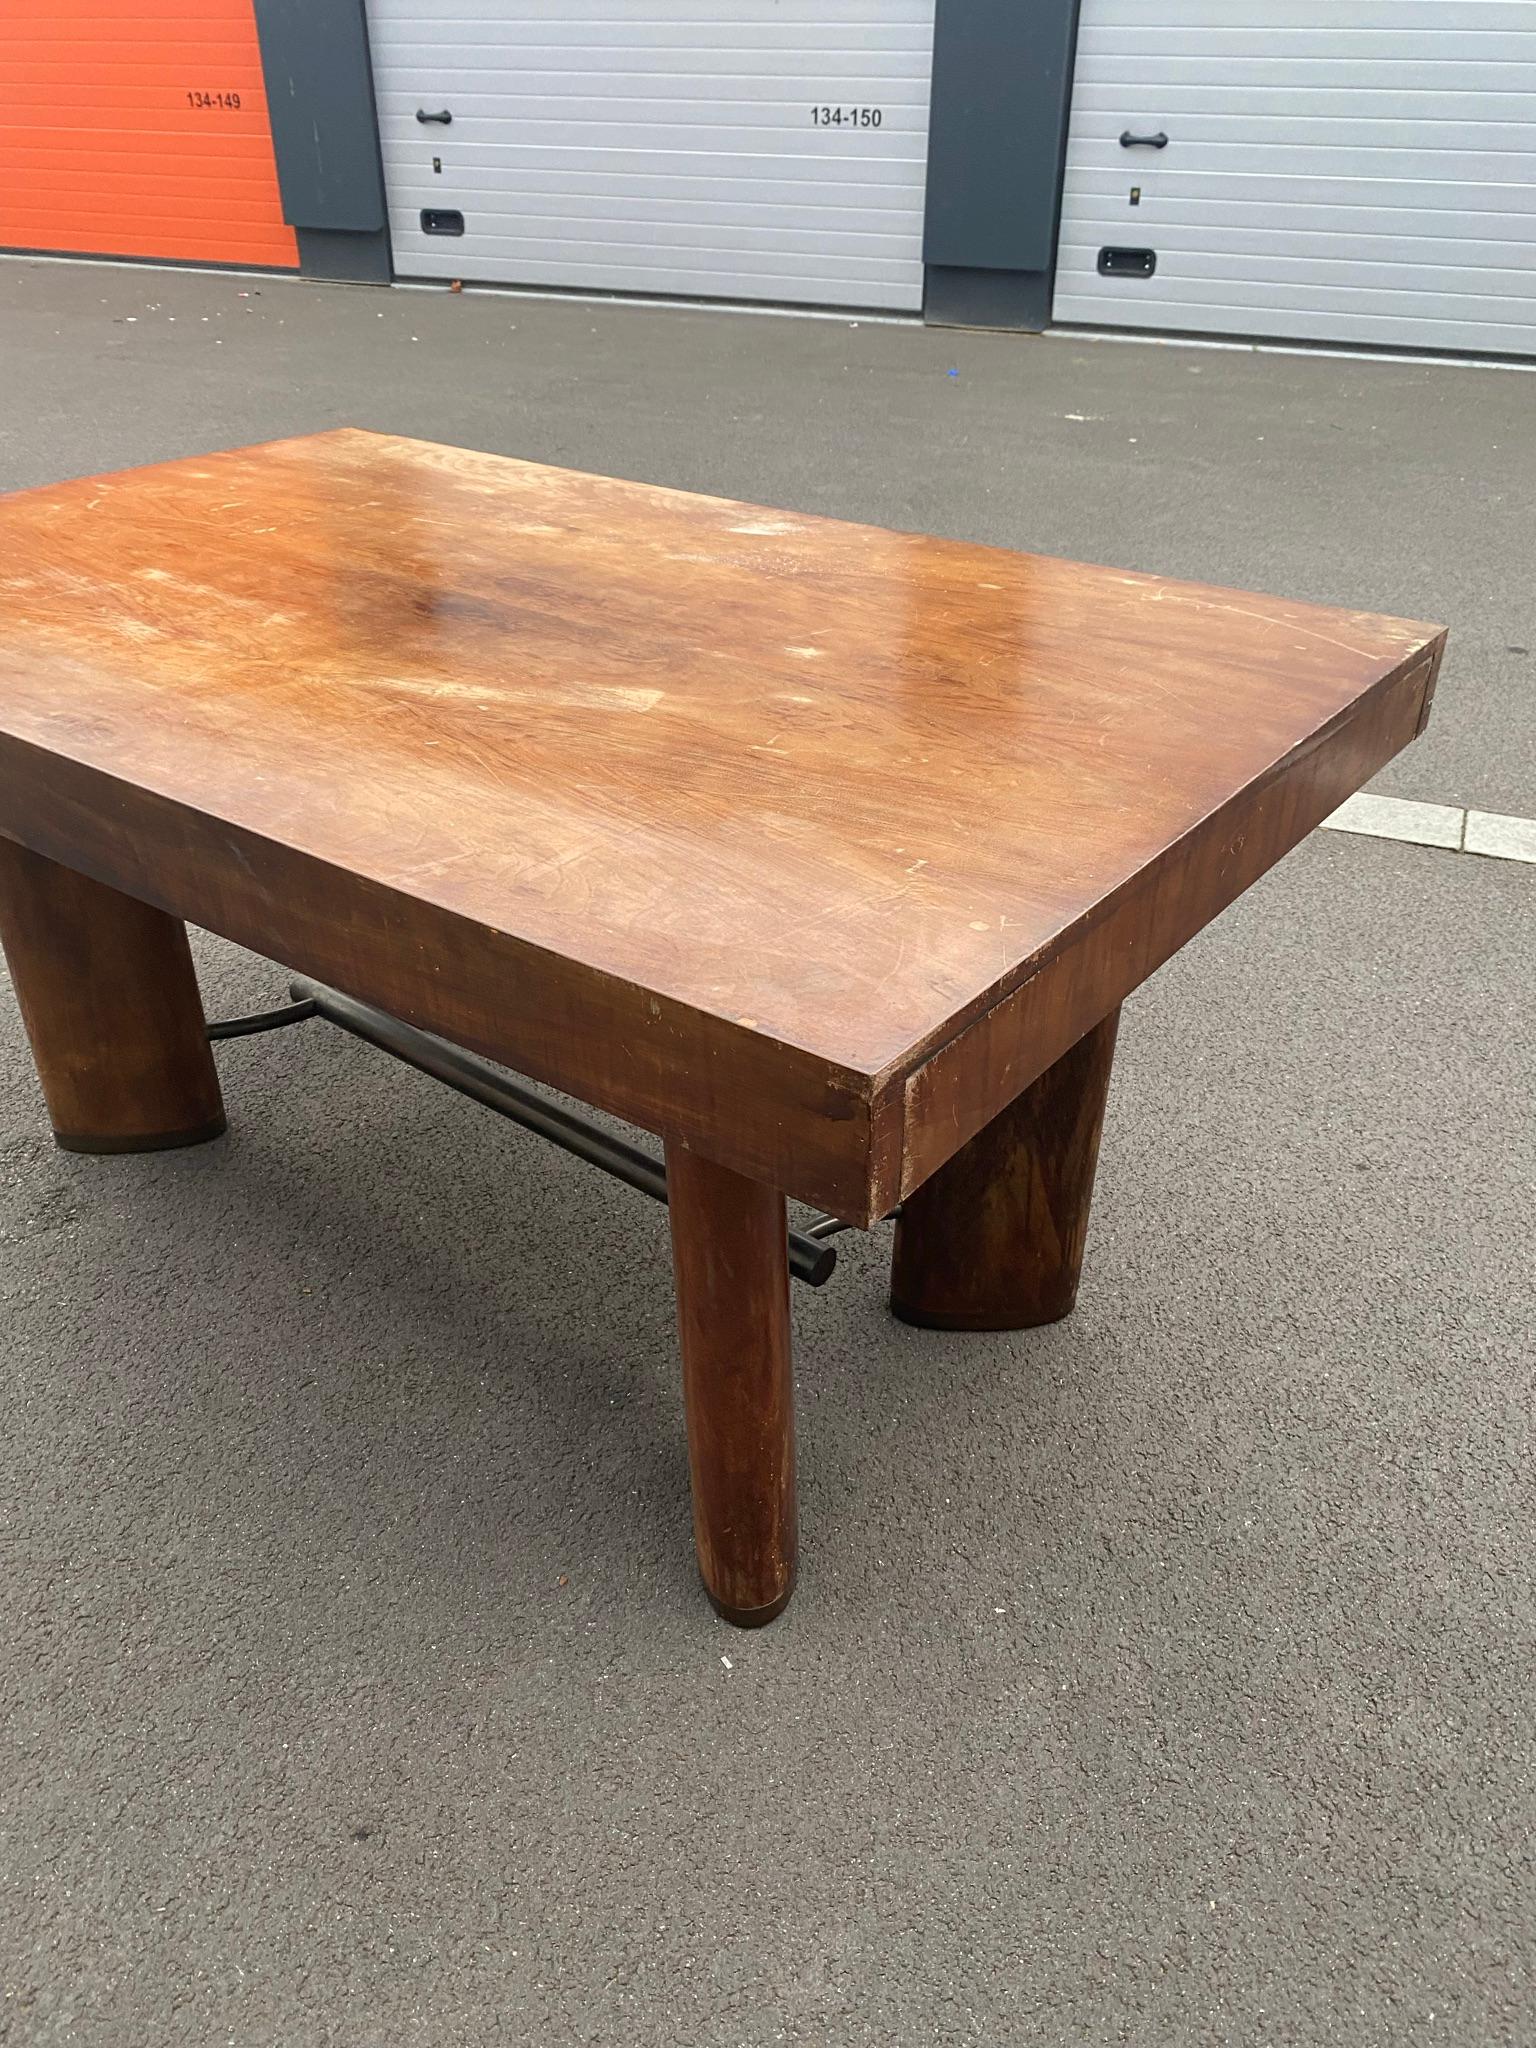 Modernist Art Deco Desk or Table in Walnut, Metal Spacer and Shoe, circa 1930 For Sale 2